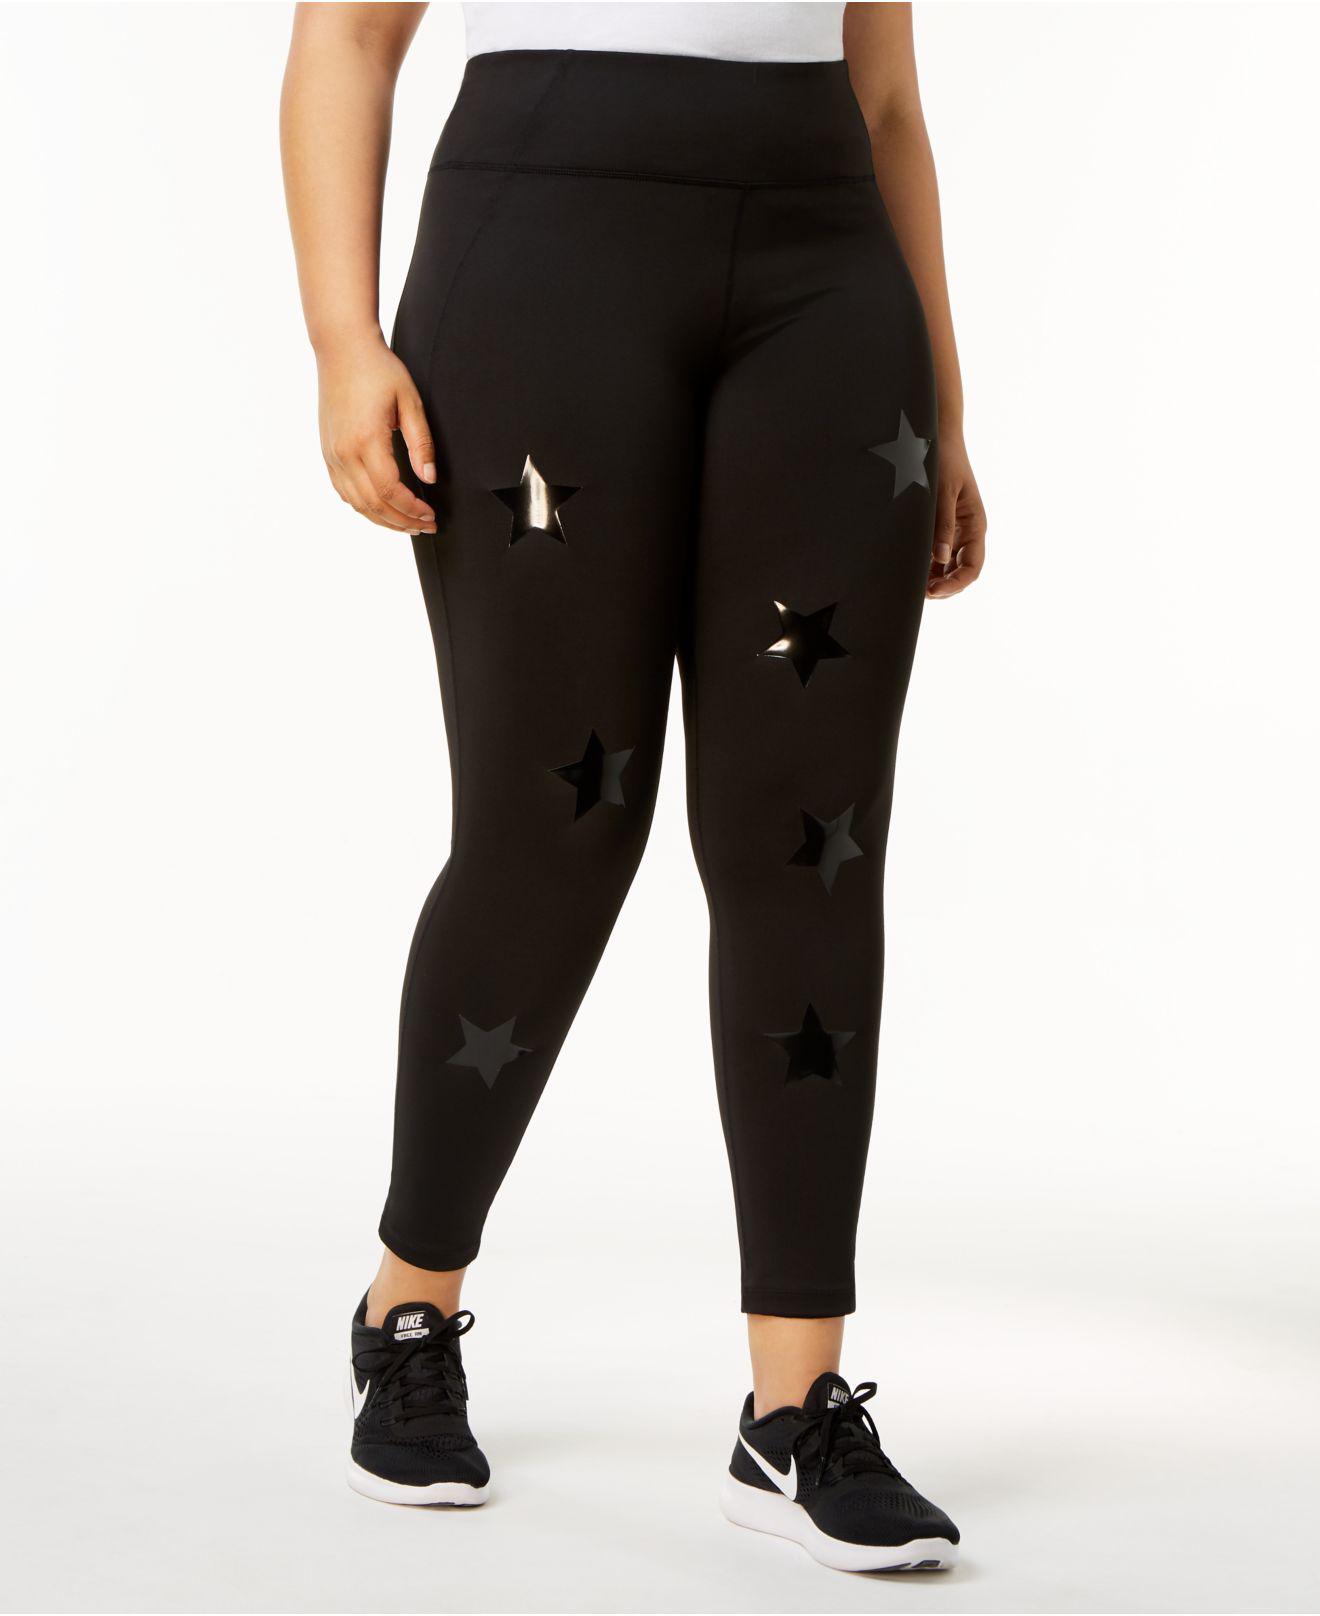 calvin klein star leggings Cheaper Than Retail Price> Buy Clothing,  Accessories and lifestyle products for women & men -